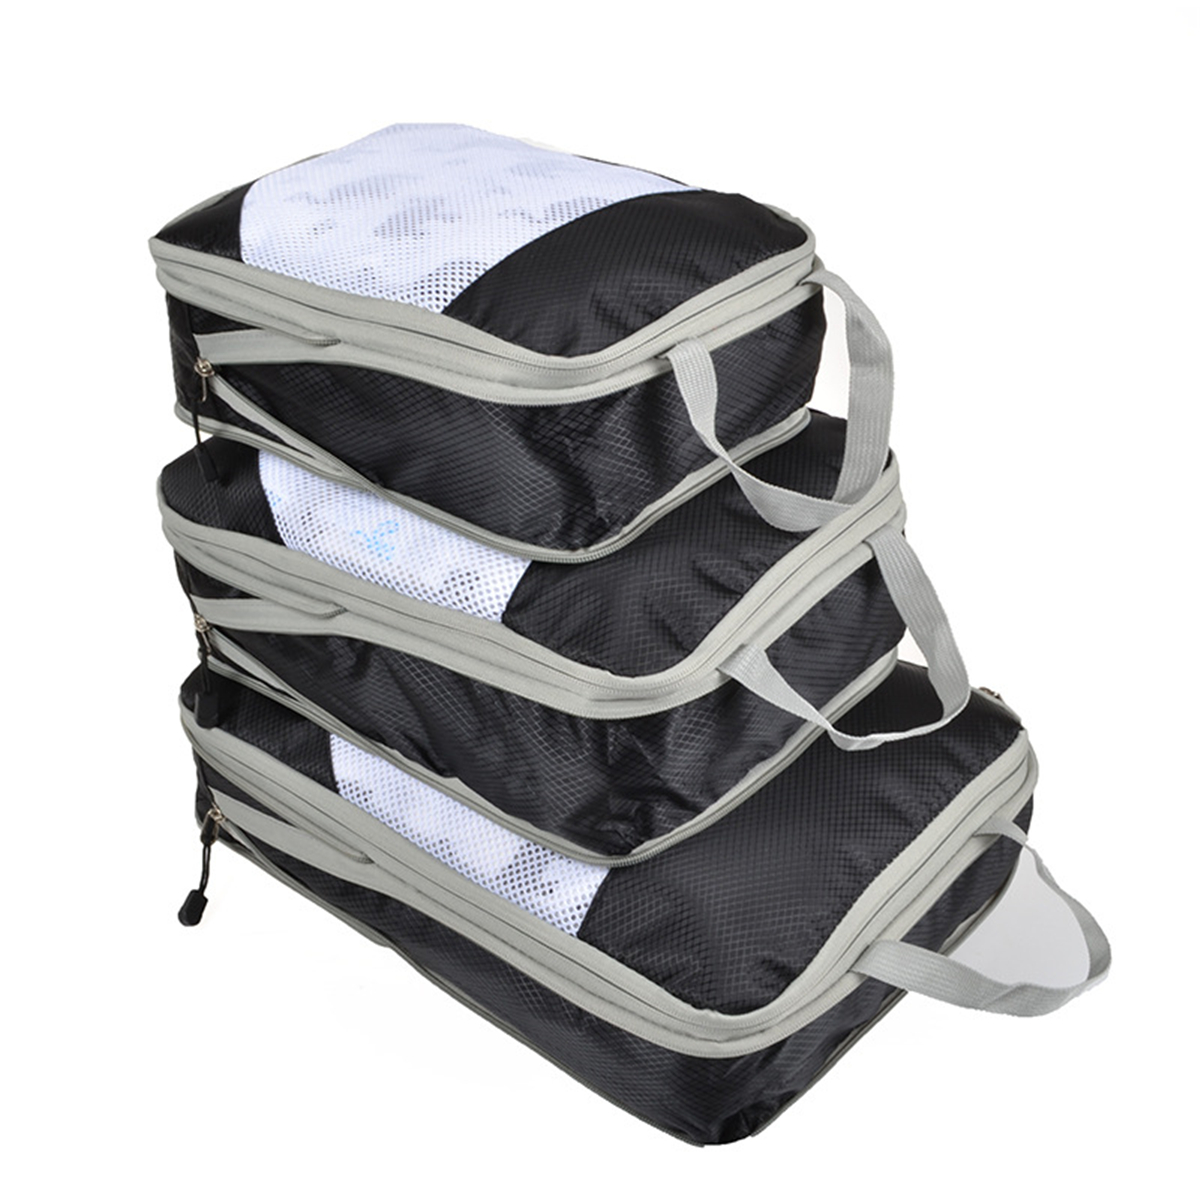 3PCS-Waterproof-Packing-Bags-Outdoor-Traveling-Luggage-Storage-Bag-Clothes-Bags-1603720-6